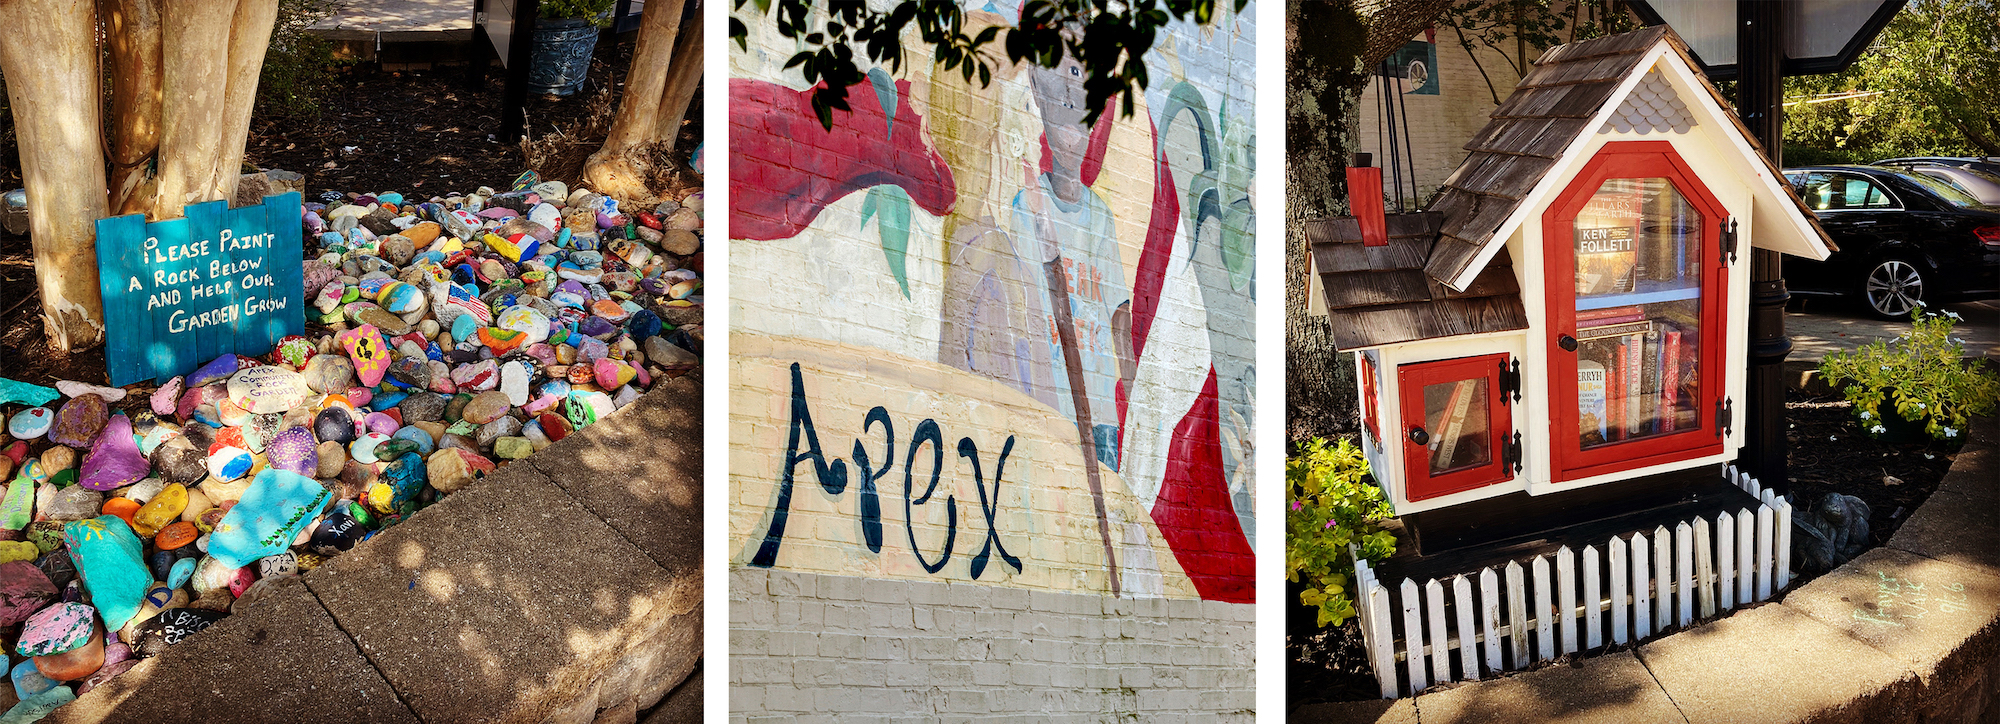 book exchange mural and rock garden are things to see in apex